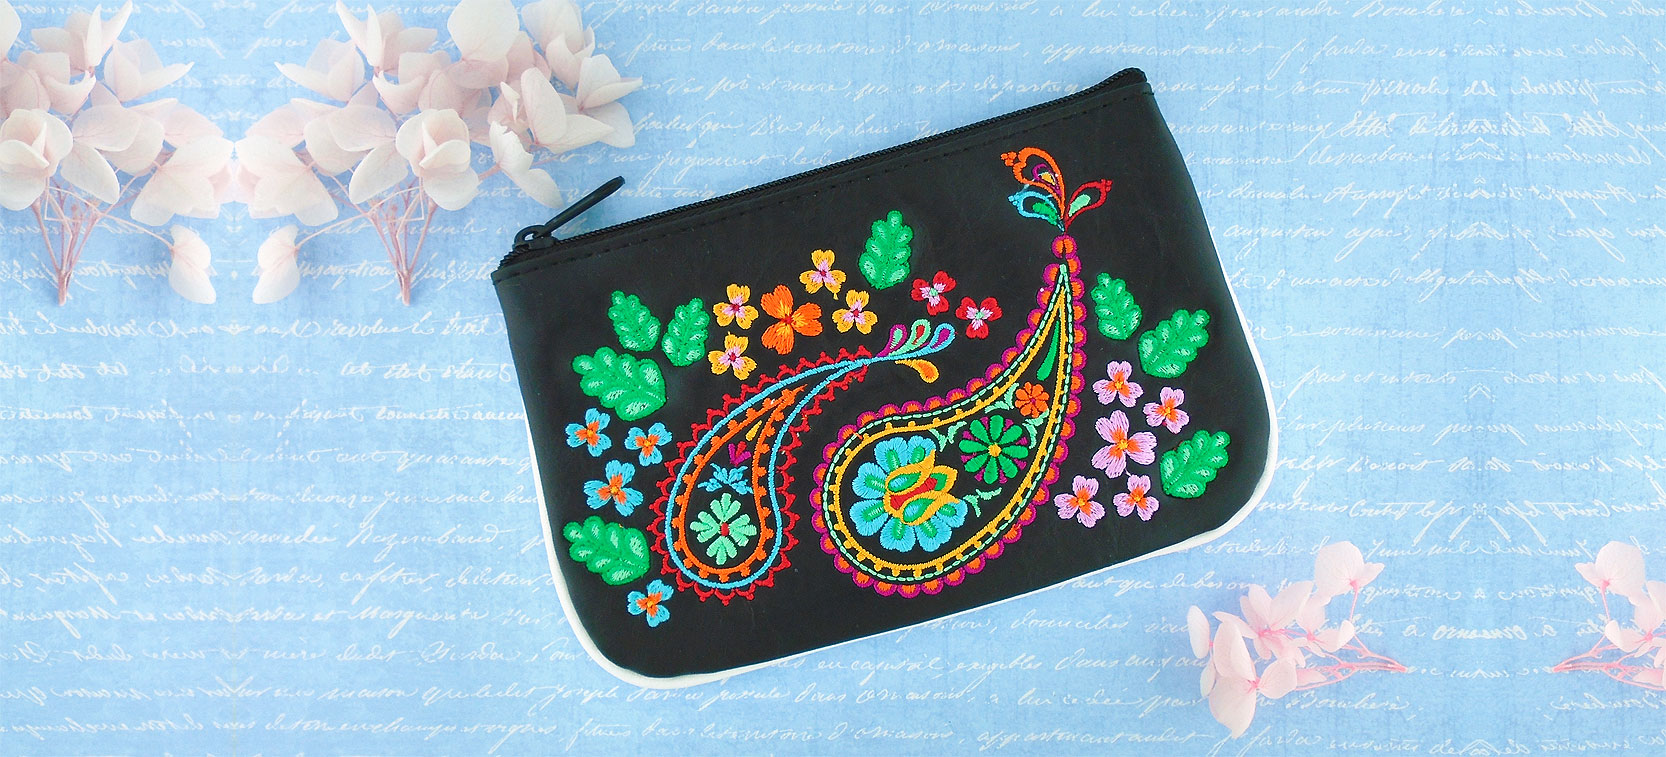 LAVISHY design and wholesale India themed vegan accessories and gfits to gift shops, boutiques and book stores in Canada, USA and worldwide.